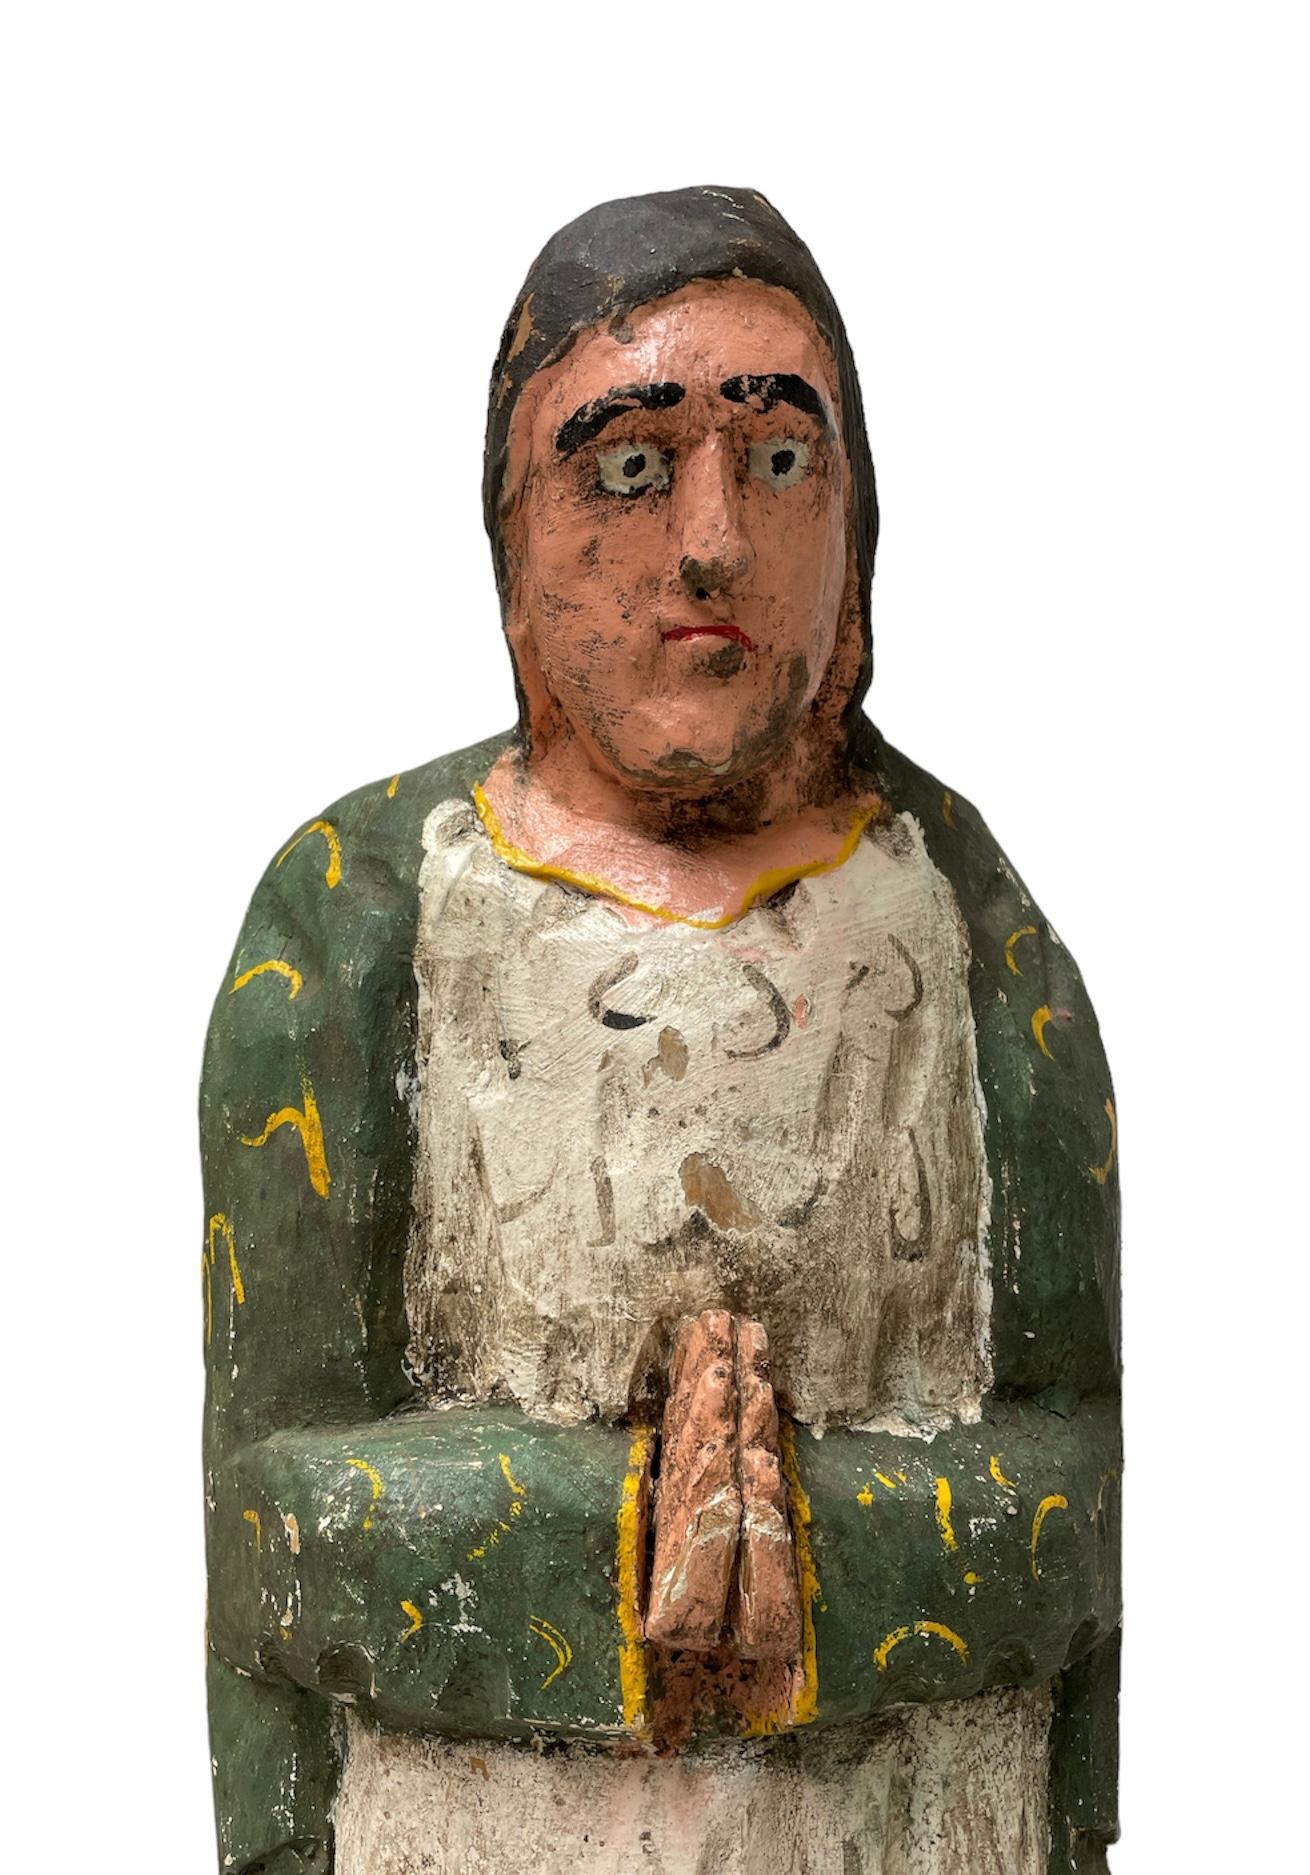 A renown tradition in Latin America the making of Santos de Palos by masters carvers since the 19th century. They hand carved and painted the saints inspired in their personal religious devotion. This is a Santos de Palos, Wood Carved Sculpture of